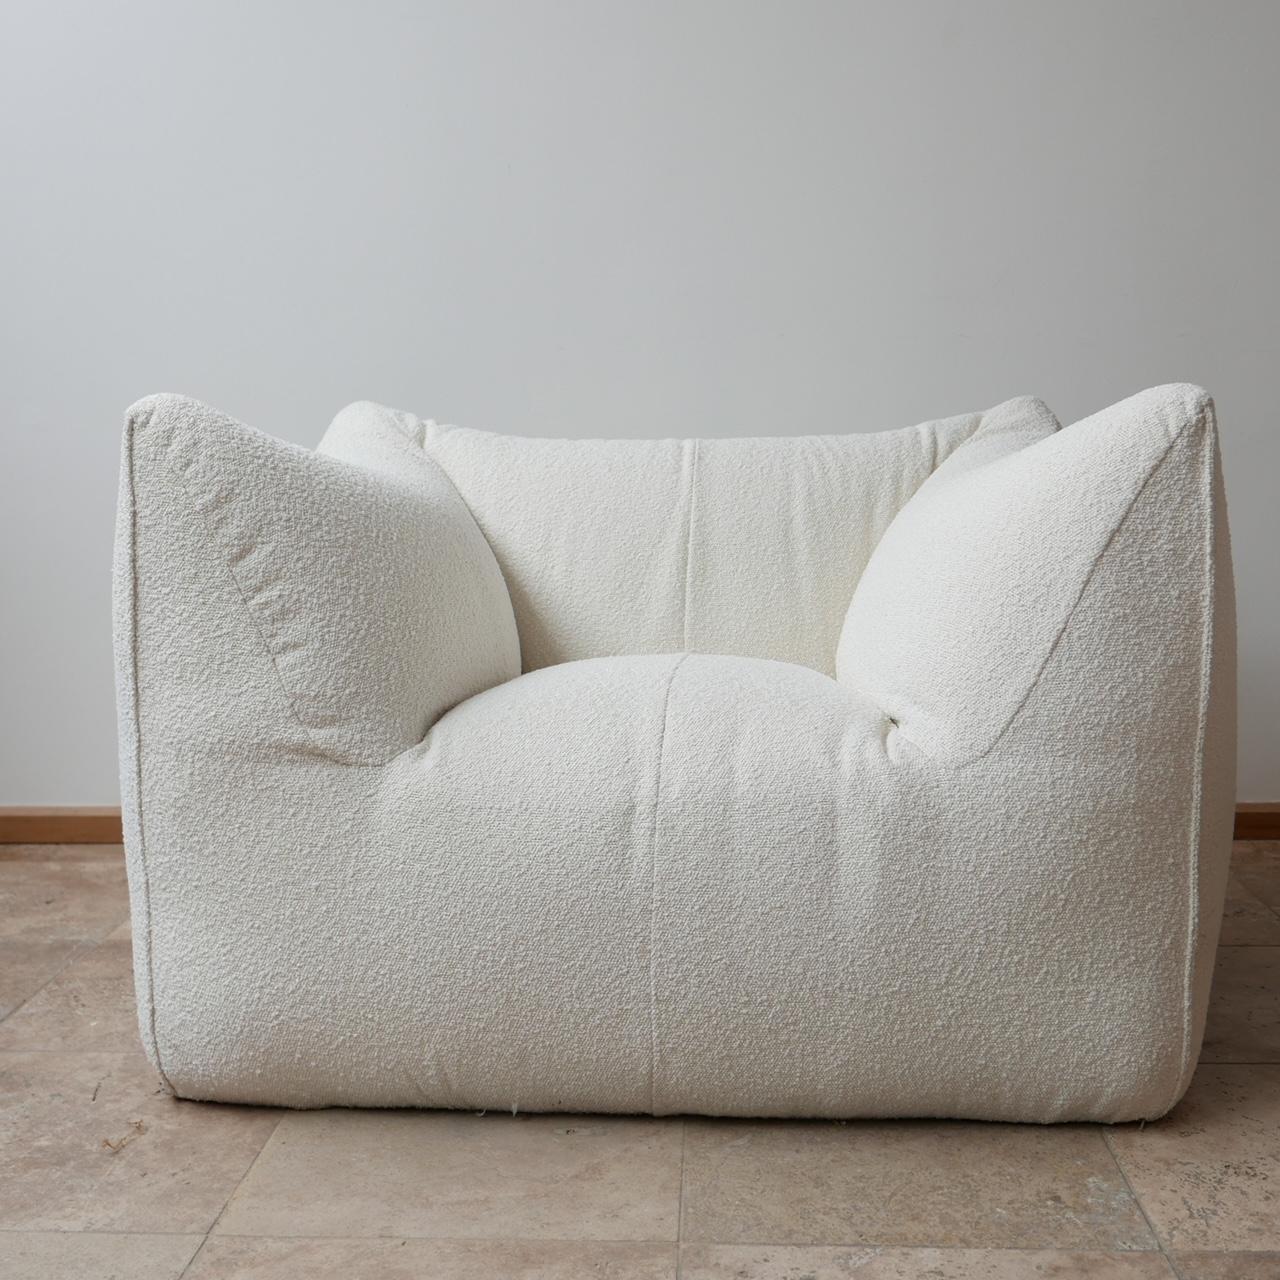 A scarce early Le Bambole armchair by Mario Bellini, esteemed Italian designer.

Italy, circa 1970s.

For B&B Italia.

Re-upholstered in white fabric with the original base retained.

Comfy and flexible as a bedroom or lounge chair, ideal